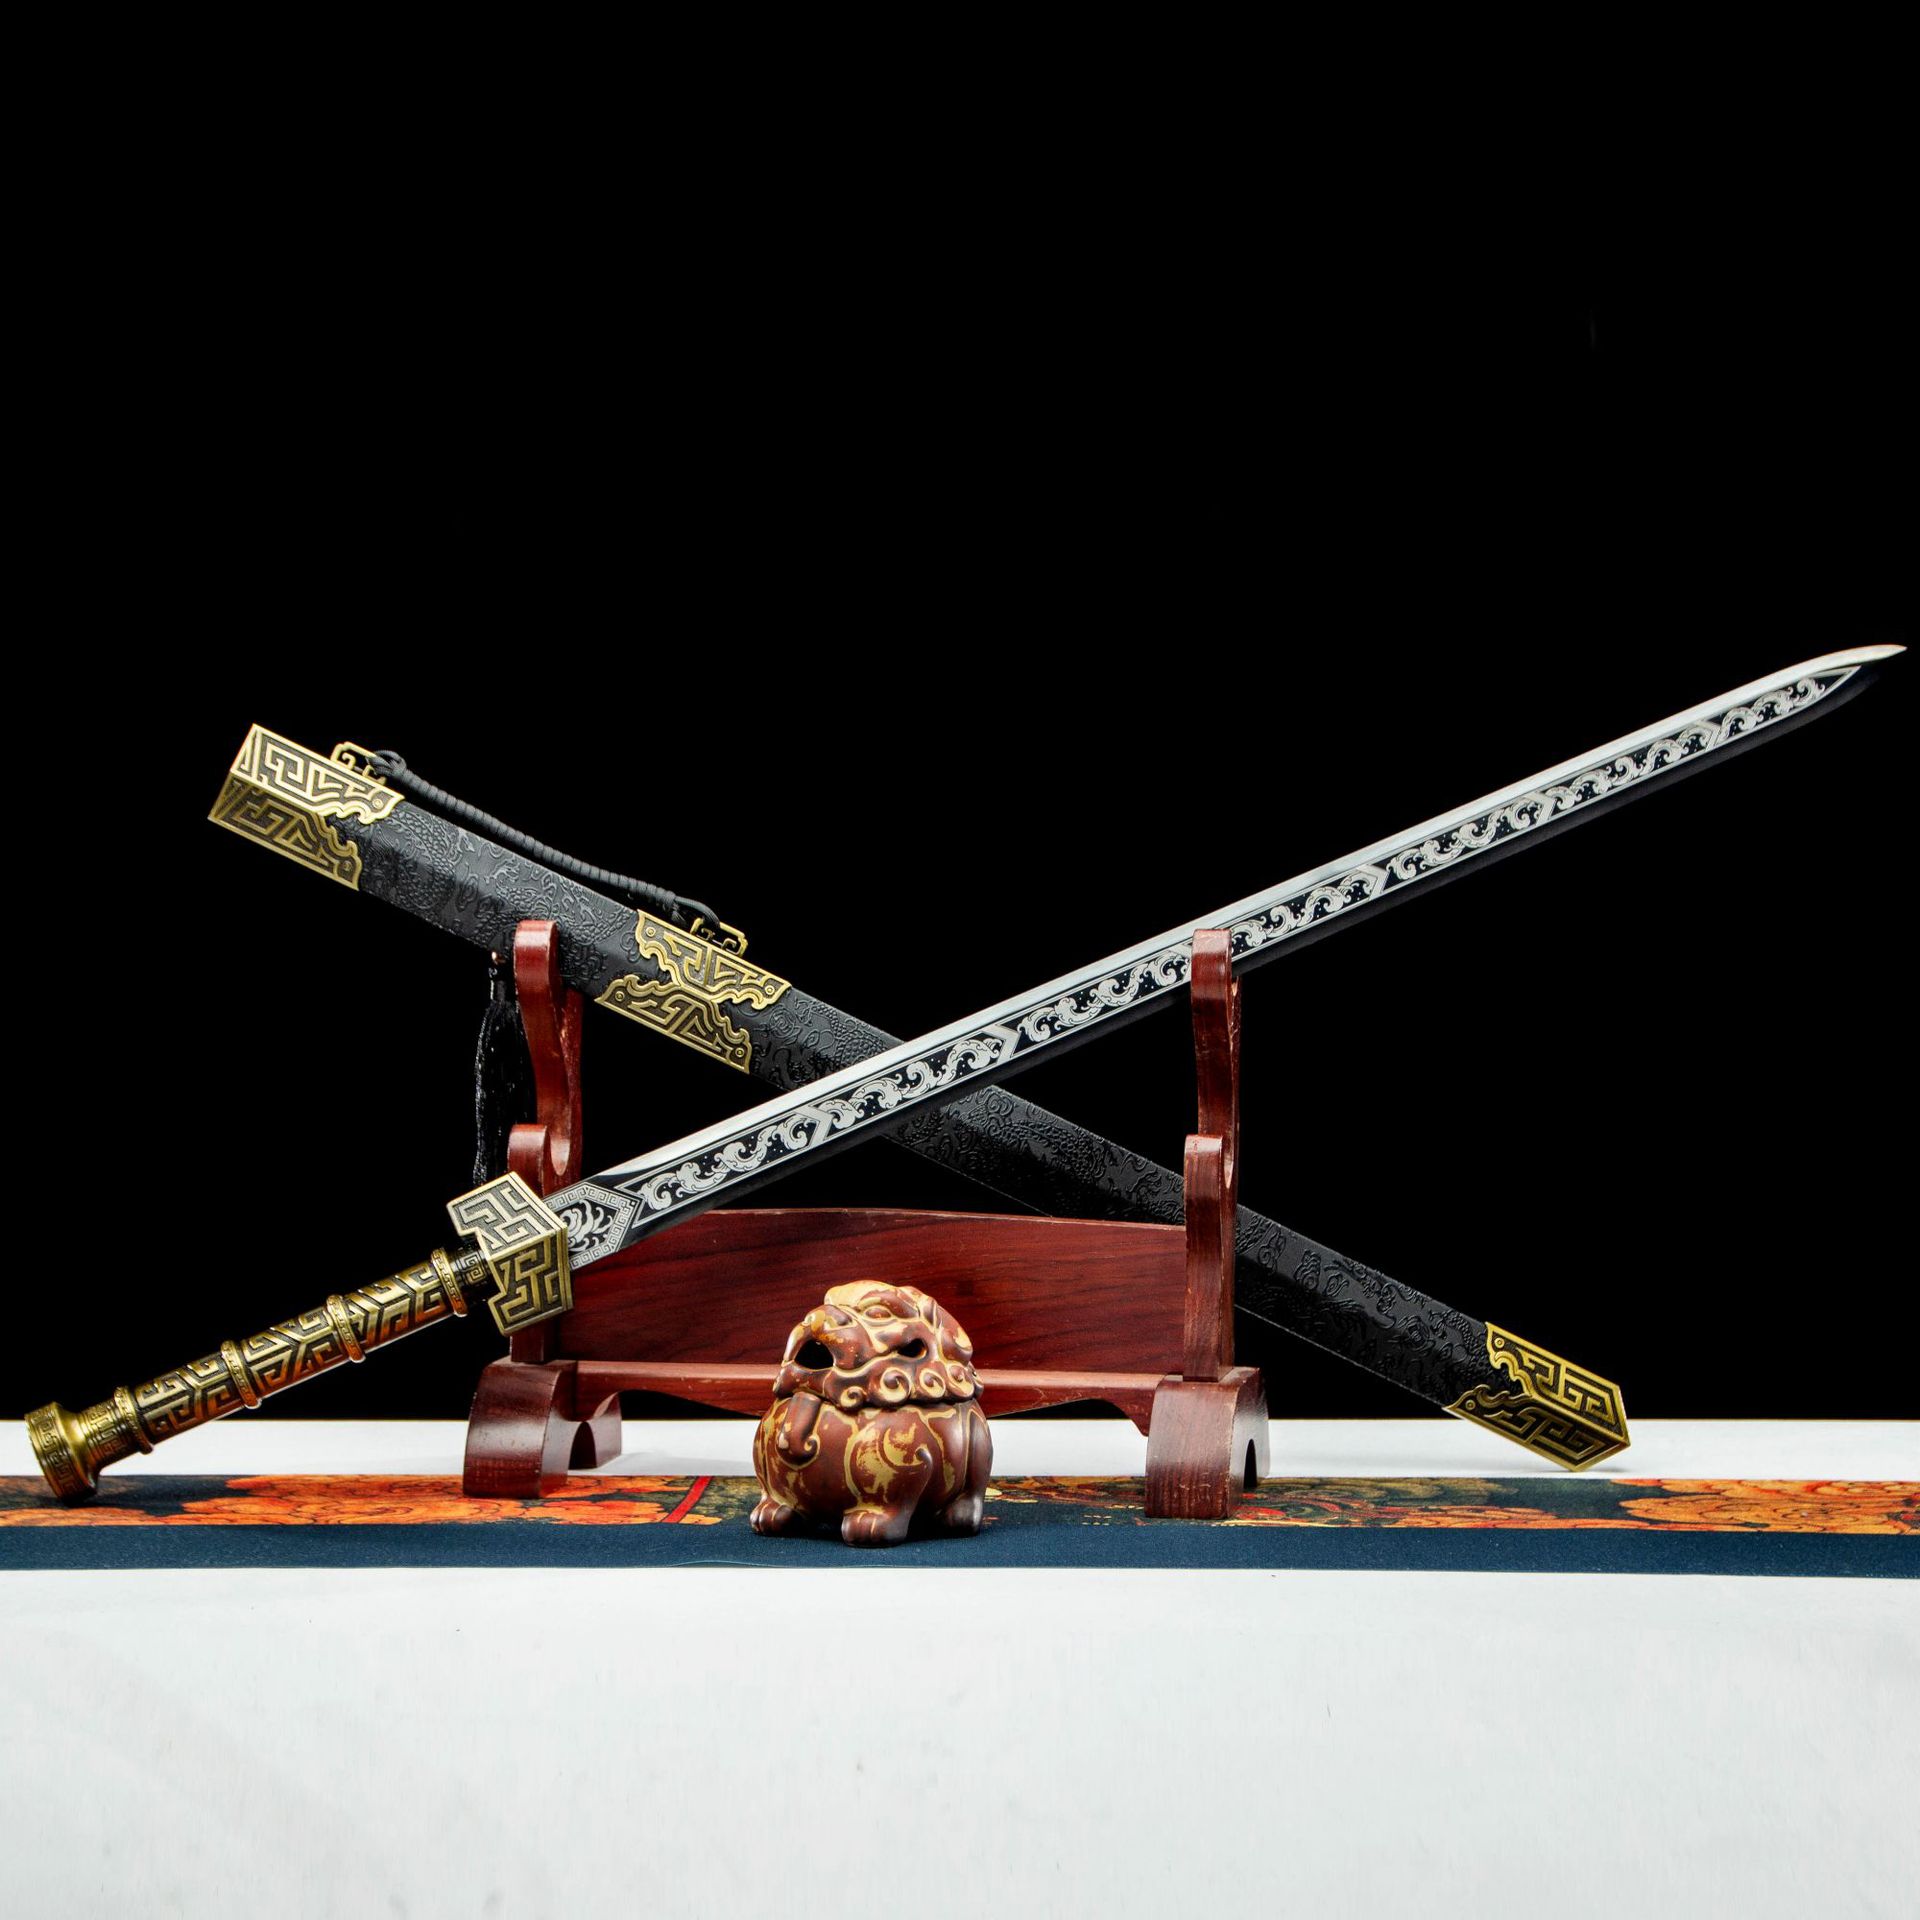 longquan city sword self-defense integrated spring and autumn wooden sword qin king sabre film and television high manganese steel hard sword collection not open blade